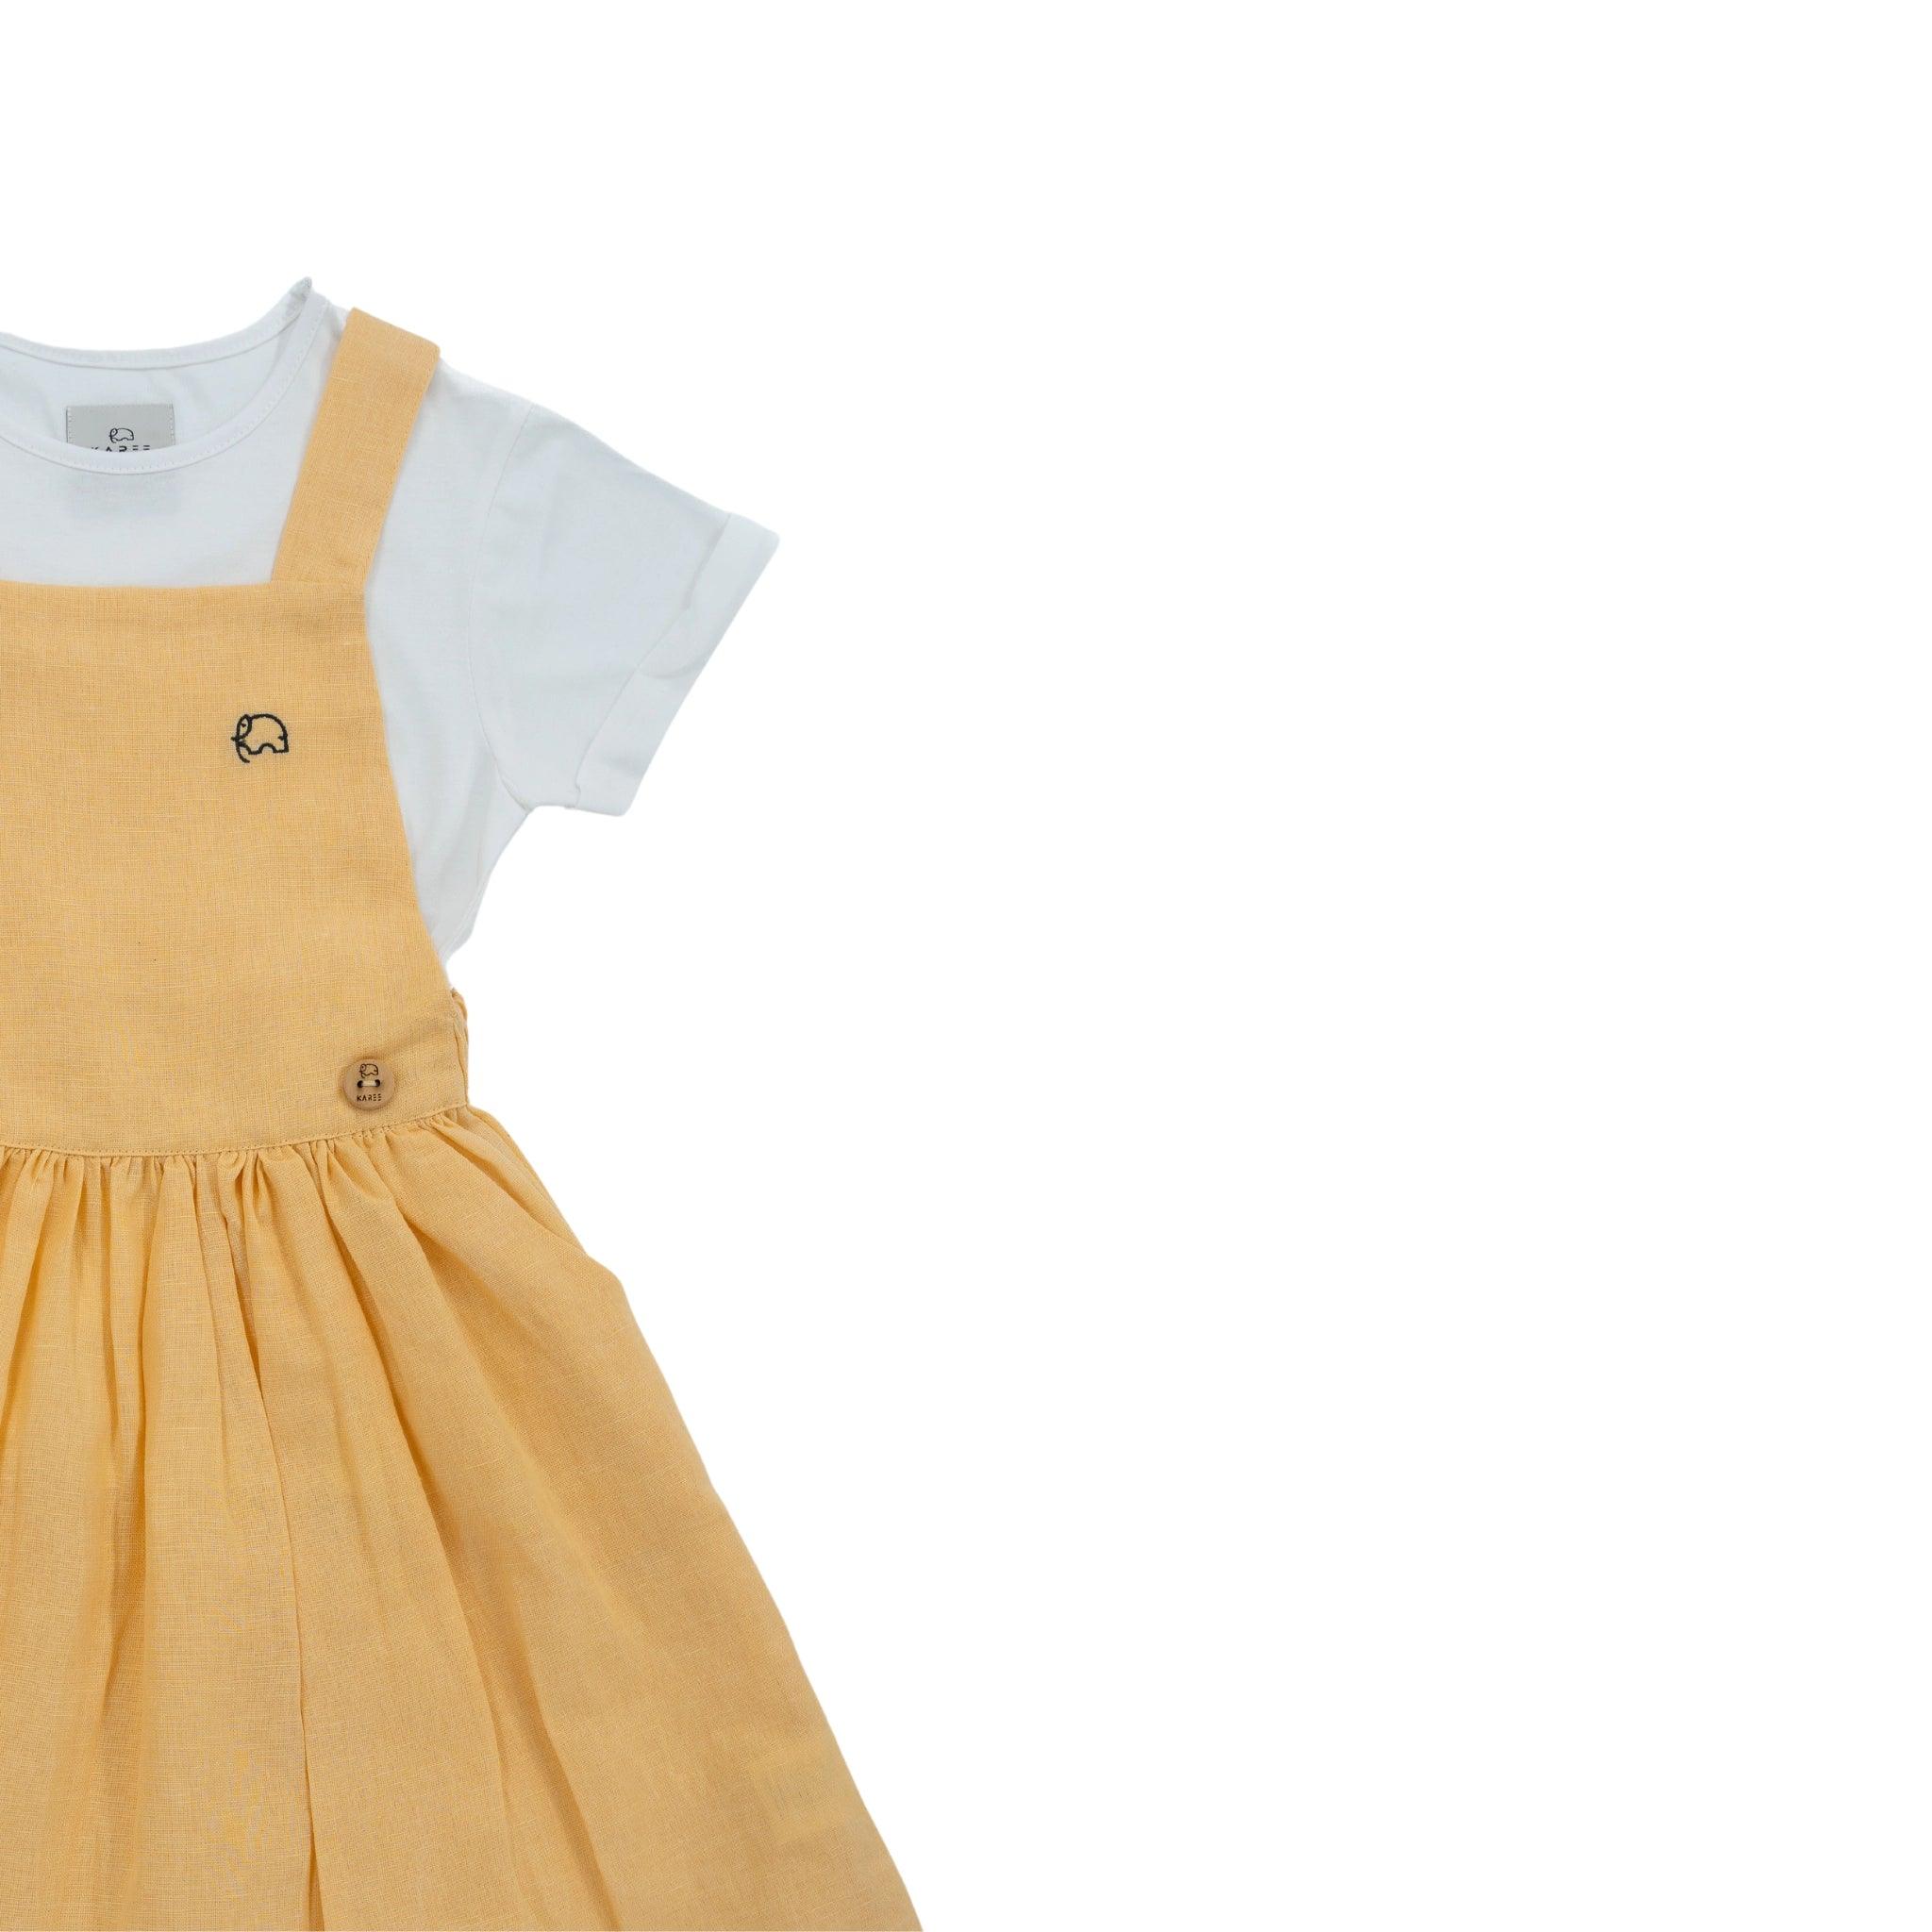 A yellow toddler's Golden Fleece Linen Pinafore by Karee with a white undershirt, featuring a small embroidered animal on the chest, displayed against a white background.